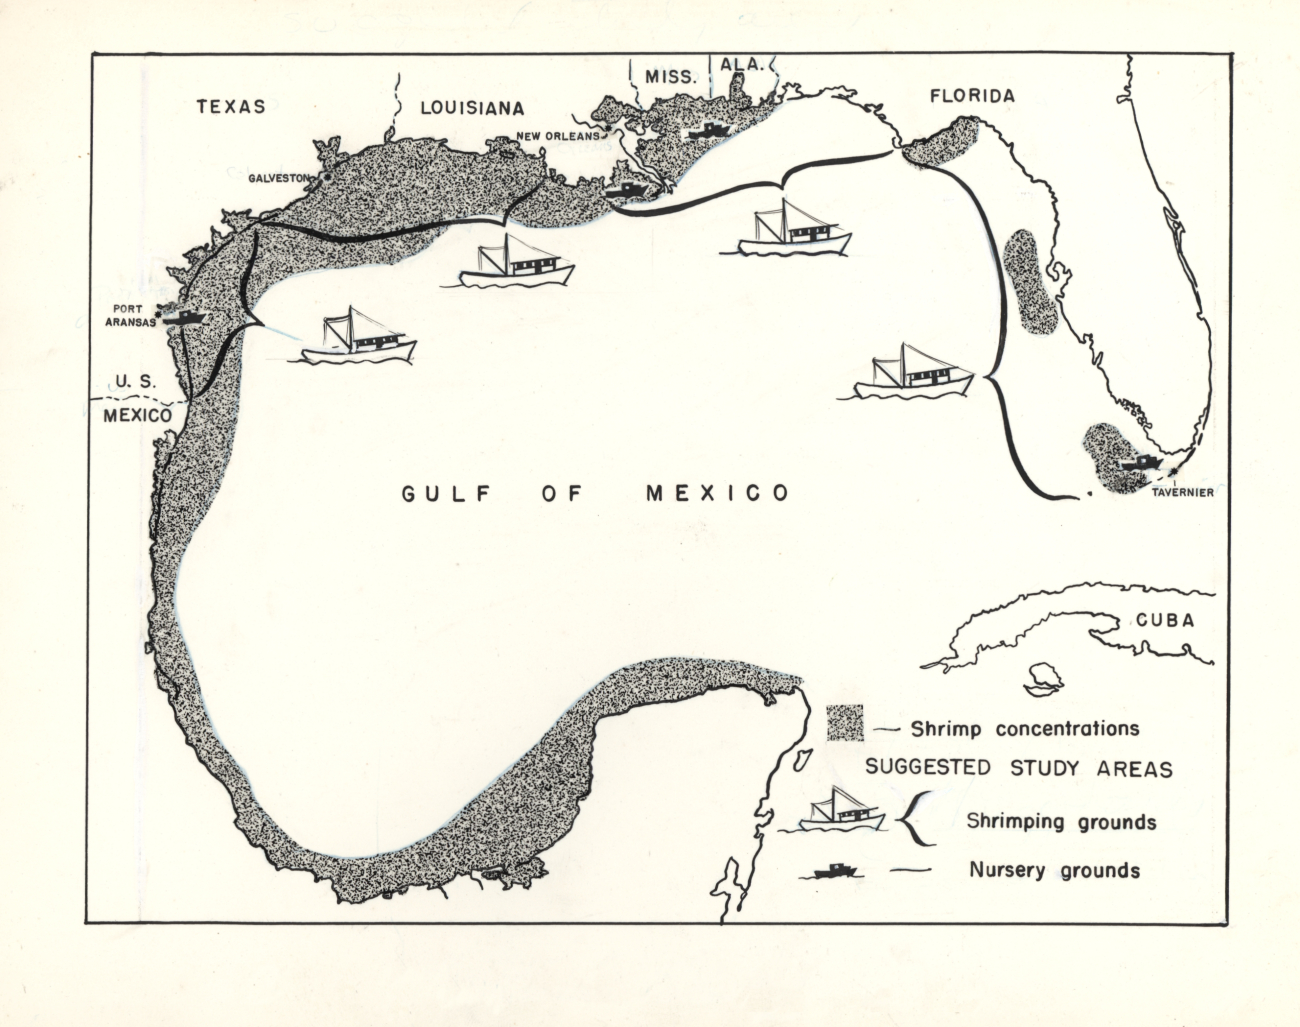 Map showing shrimp concentrations and suggested study areas in the Gulf ofMexico